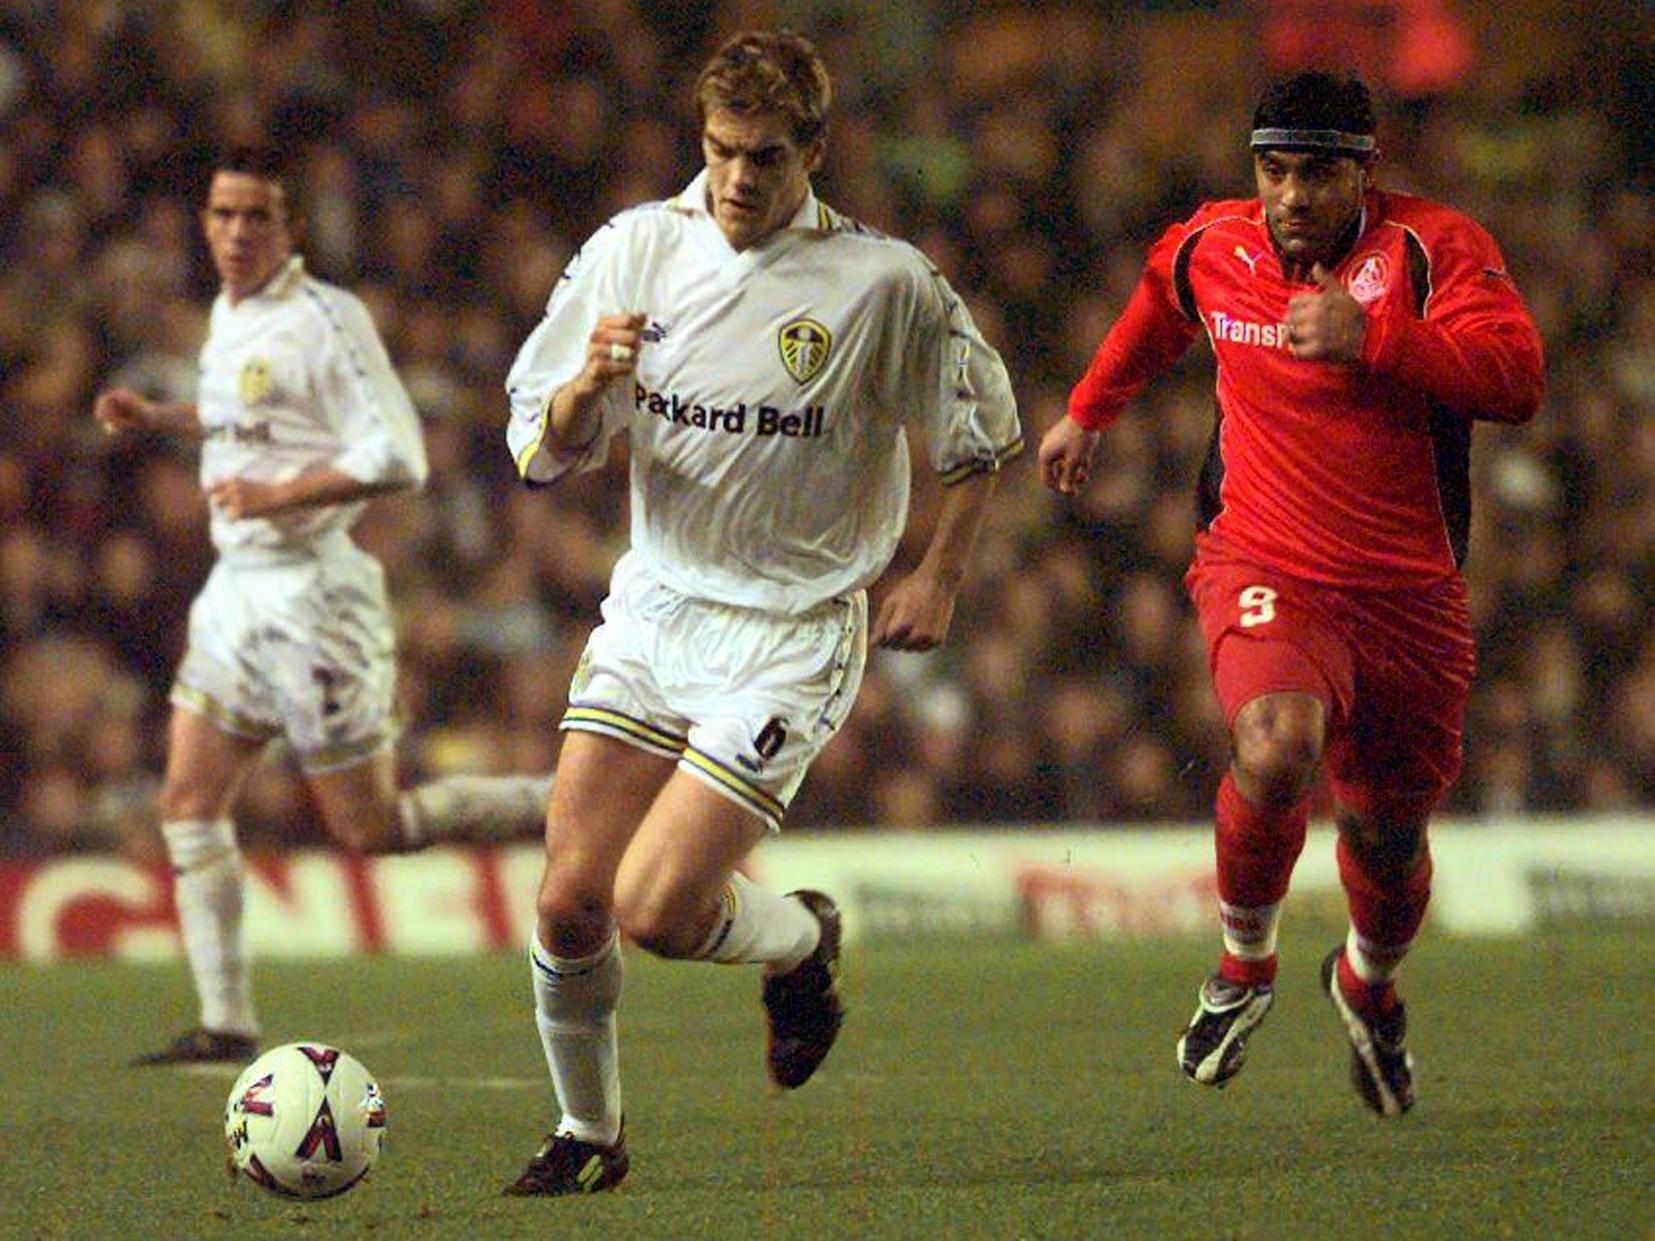 Started his career at Leeds United and made more than 100 appearances before being sold to Newcastle for nine million pounds in 2003.